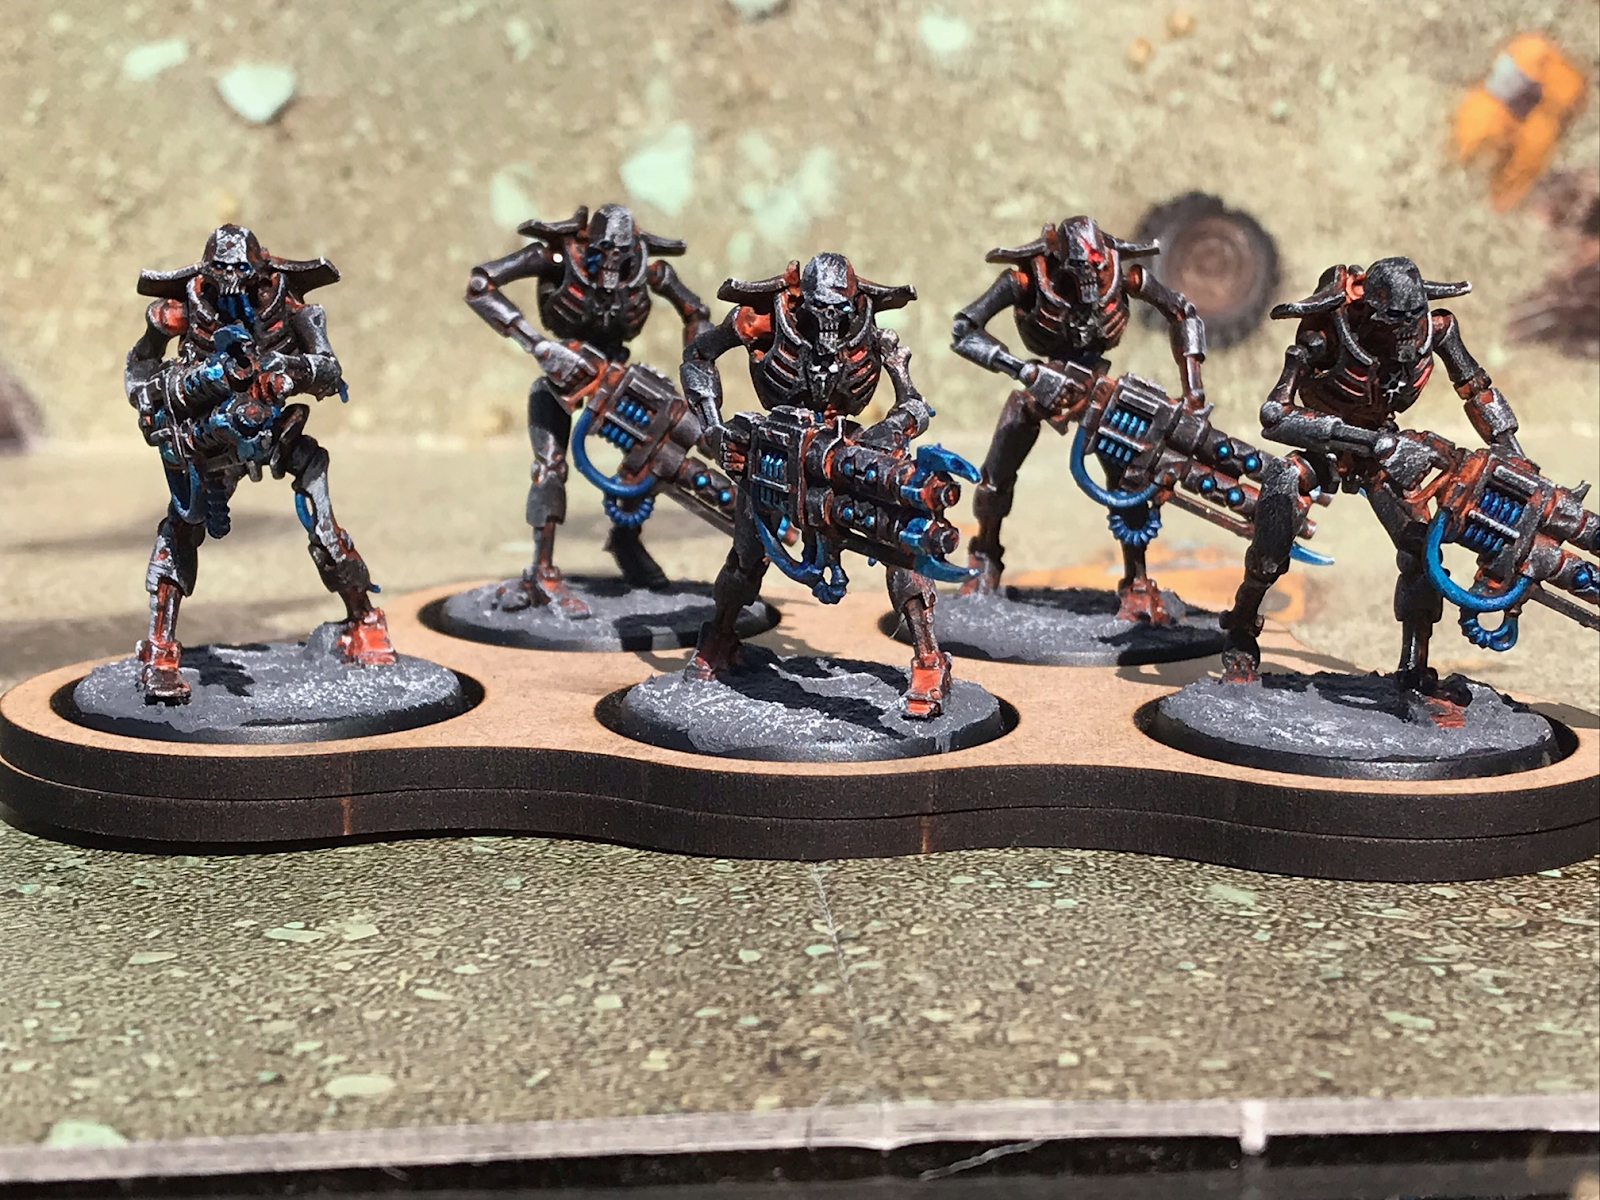 A unit of five Necrons, skeletal robot warriors. They are painted in dark coal colours, with orange light glowing from inside.